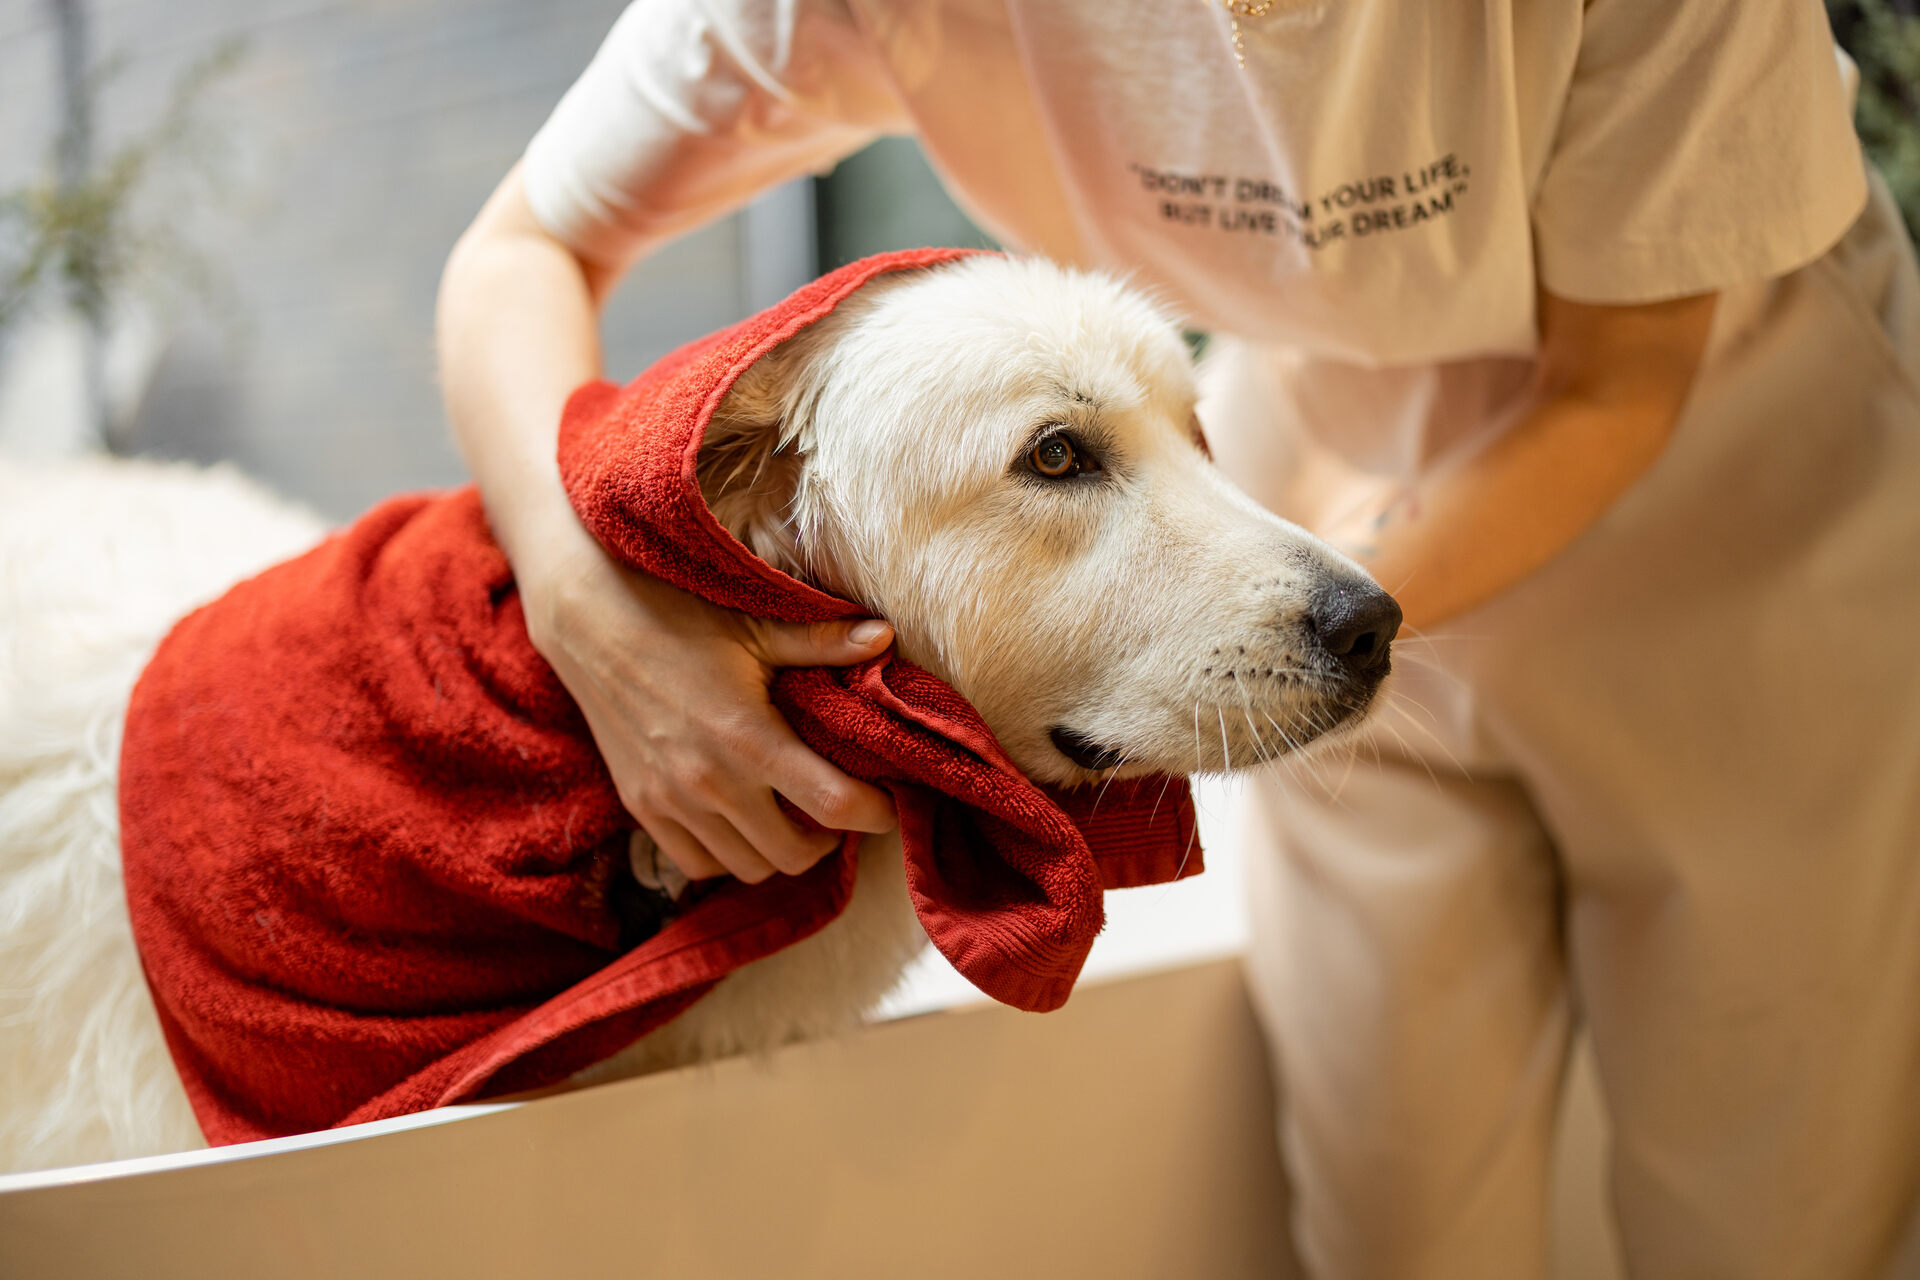 A woman wiping her dog with a red towel